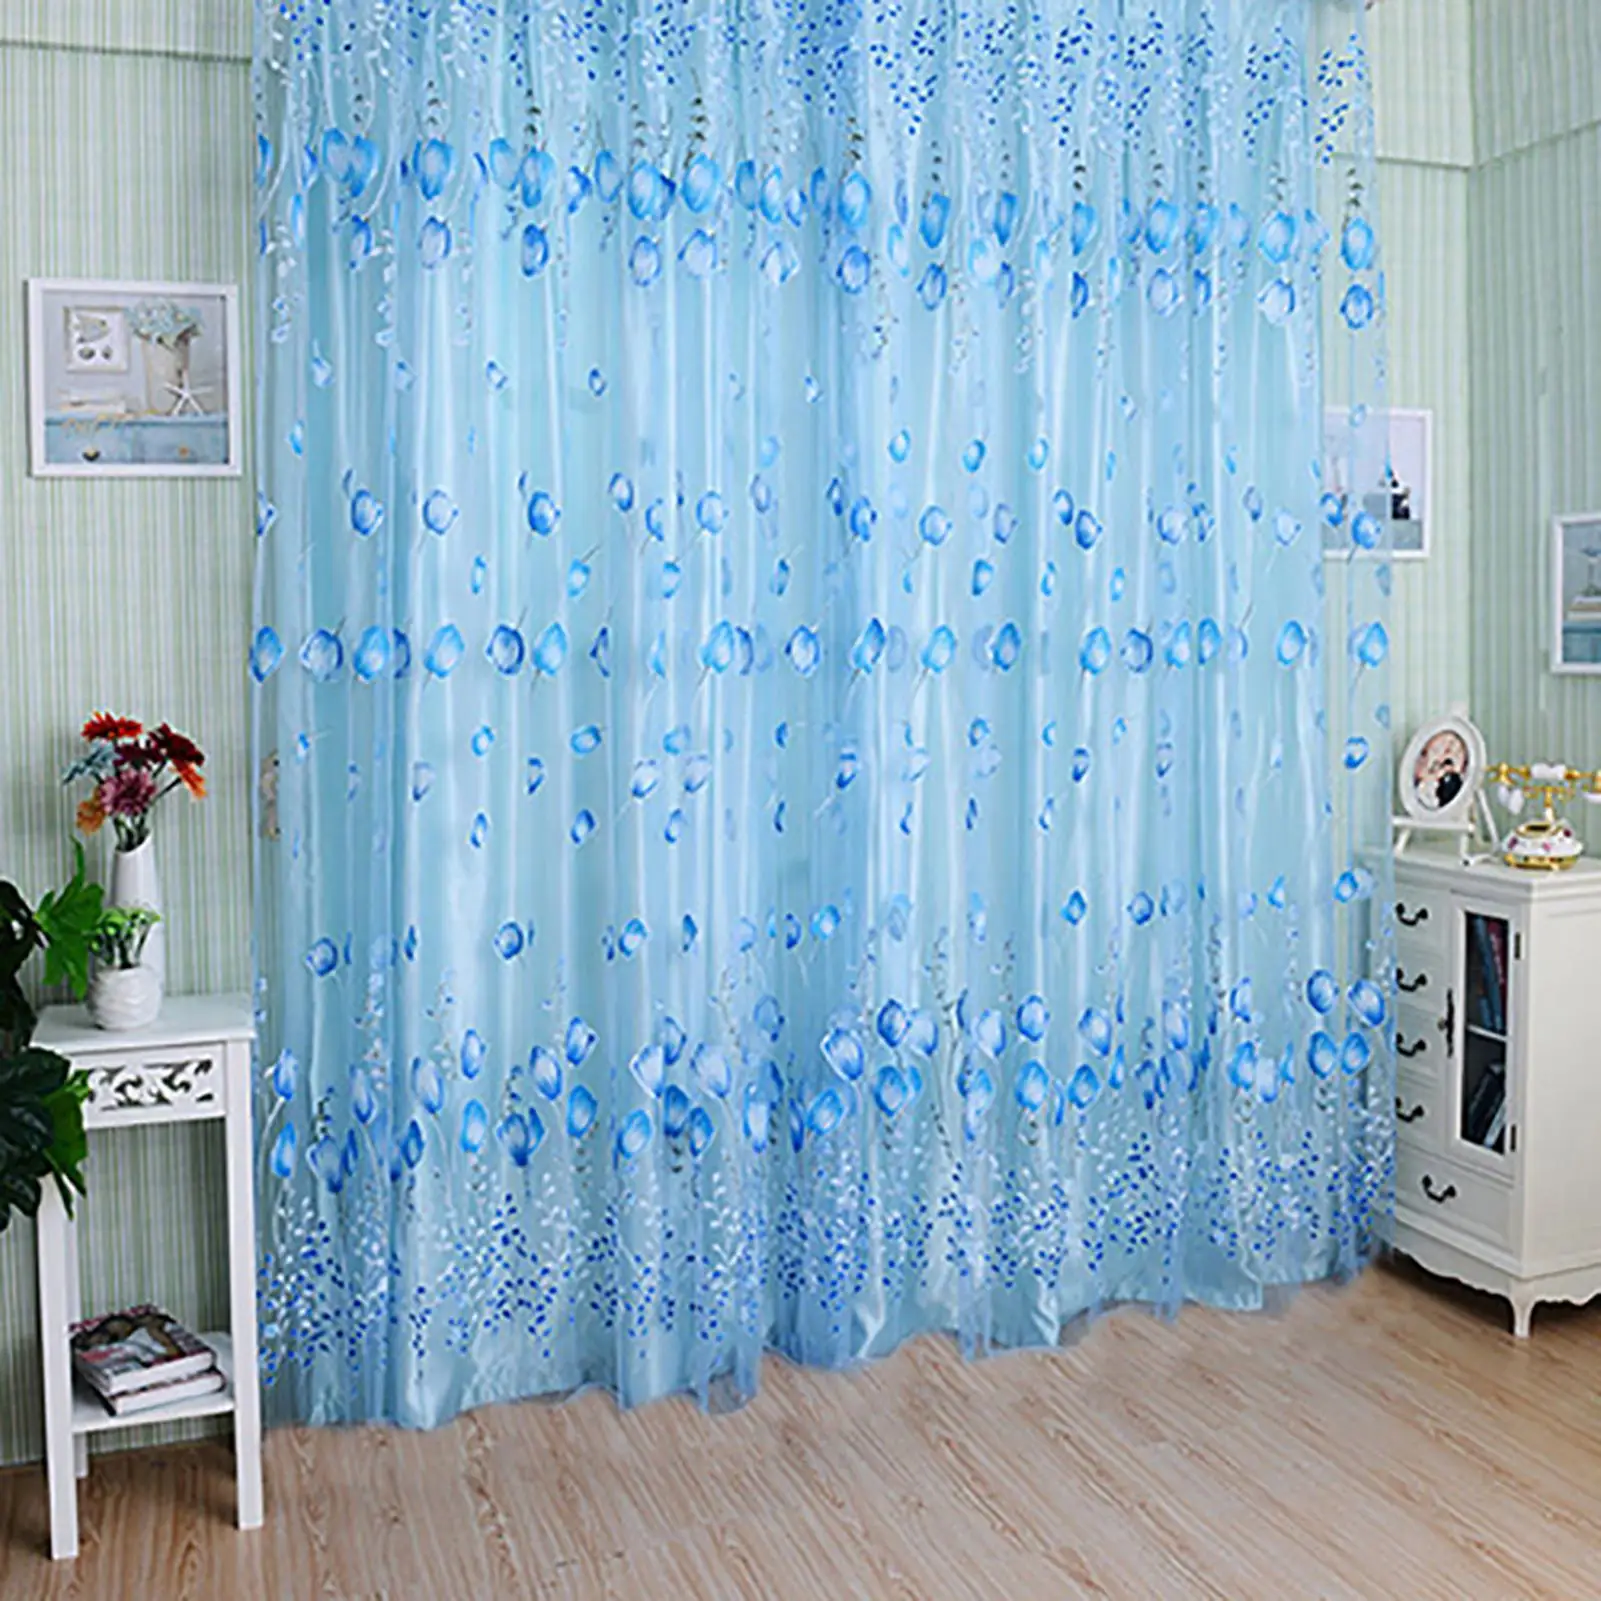 

Floral Tulle Voile Door Window Curtain Drape Panel Sheer Scarf Valances Divider Sheer Window Curtains Living Room Decor